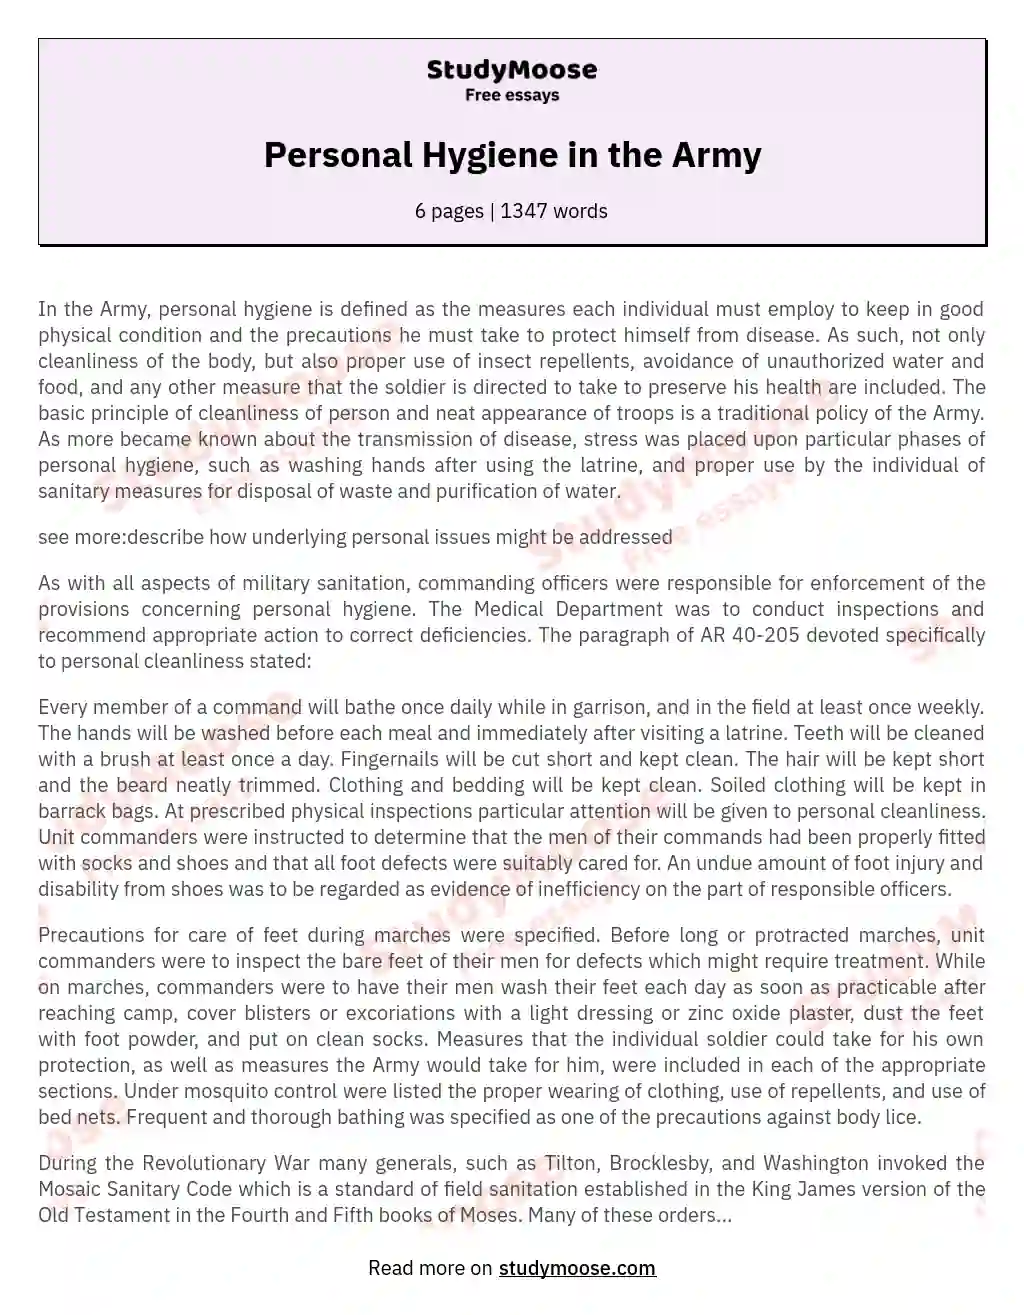 Personal Hygiene in the Army essay